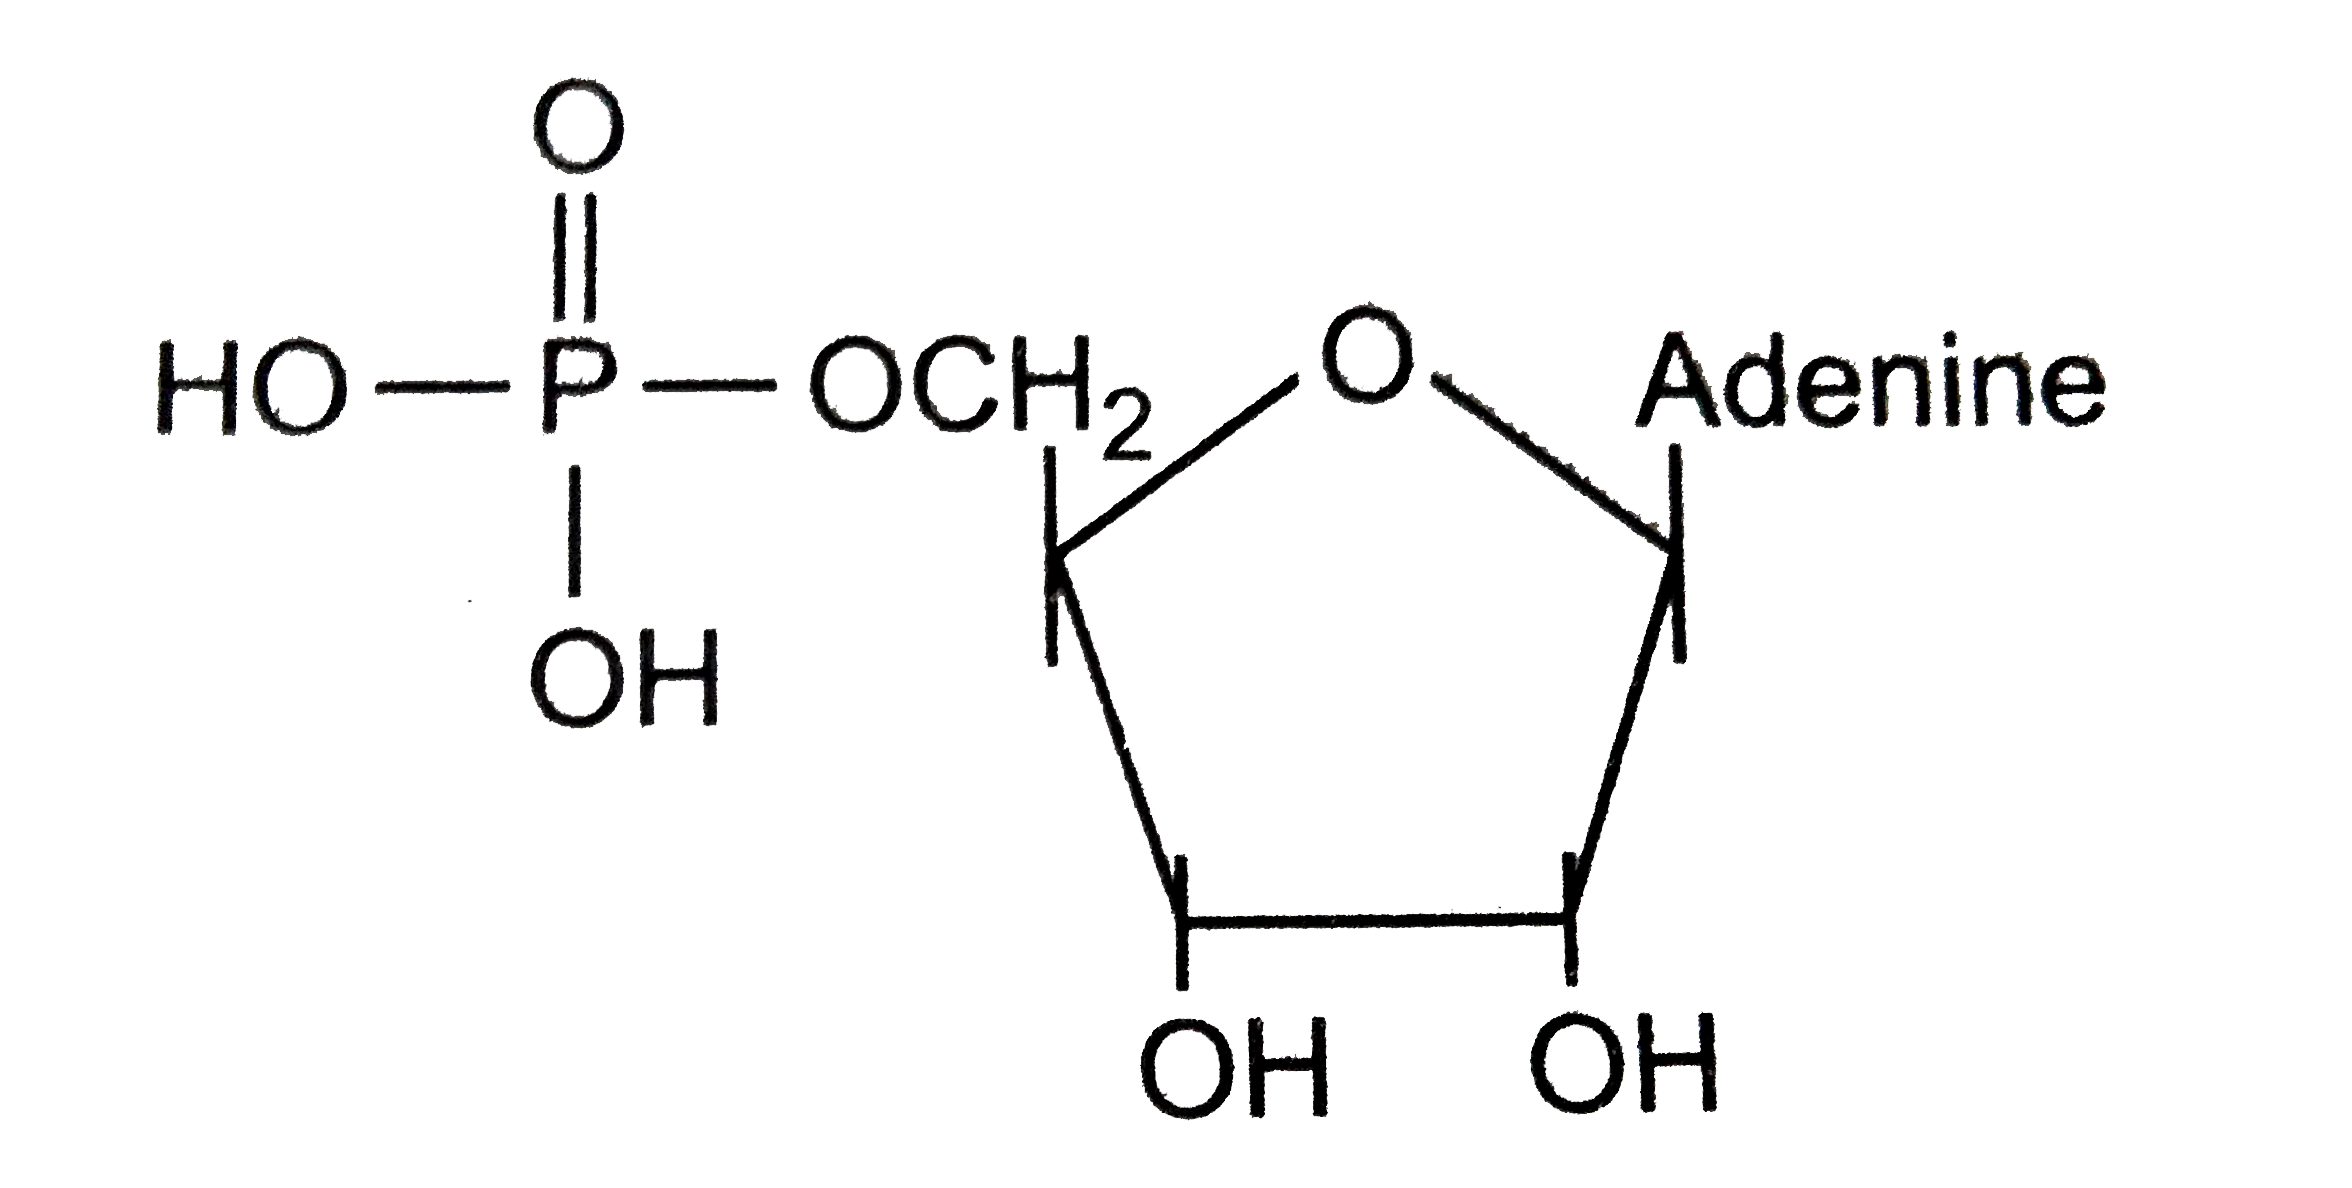 The given organic compound is a diagrammatic representation of :